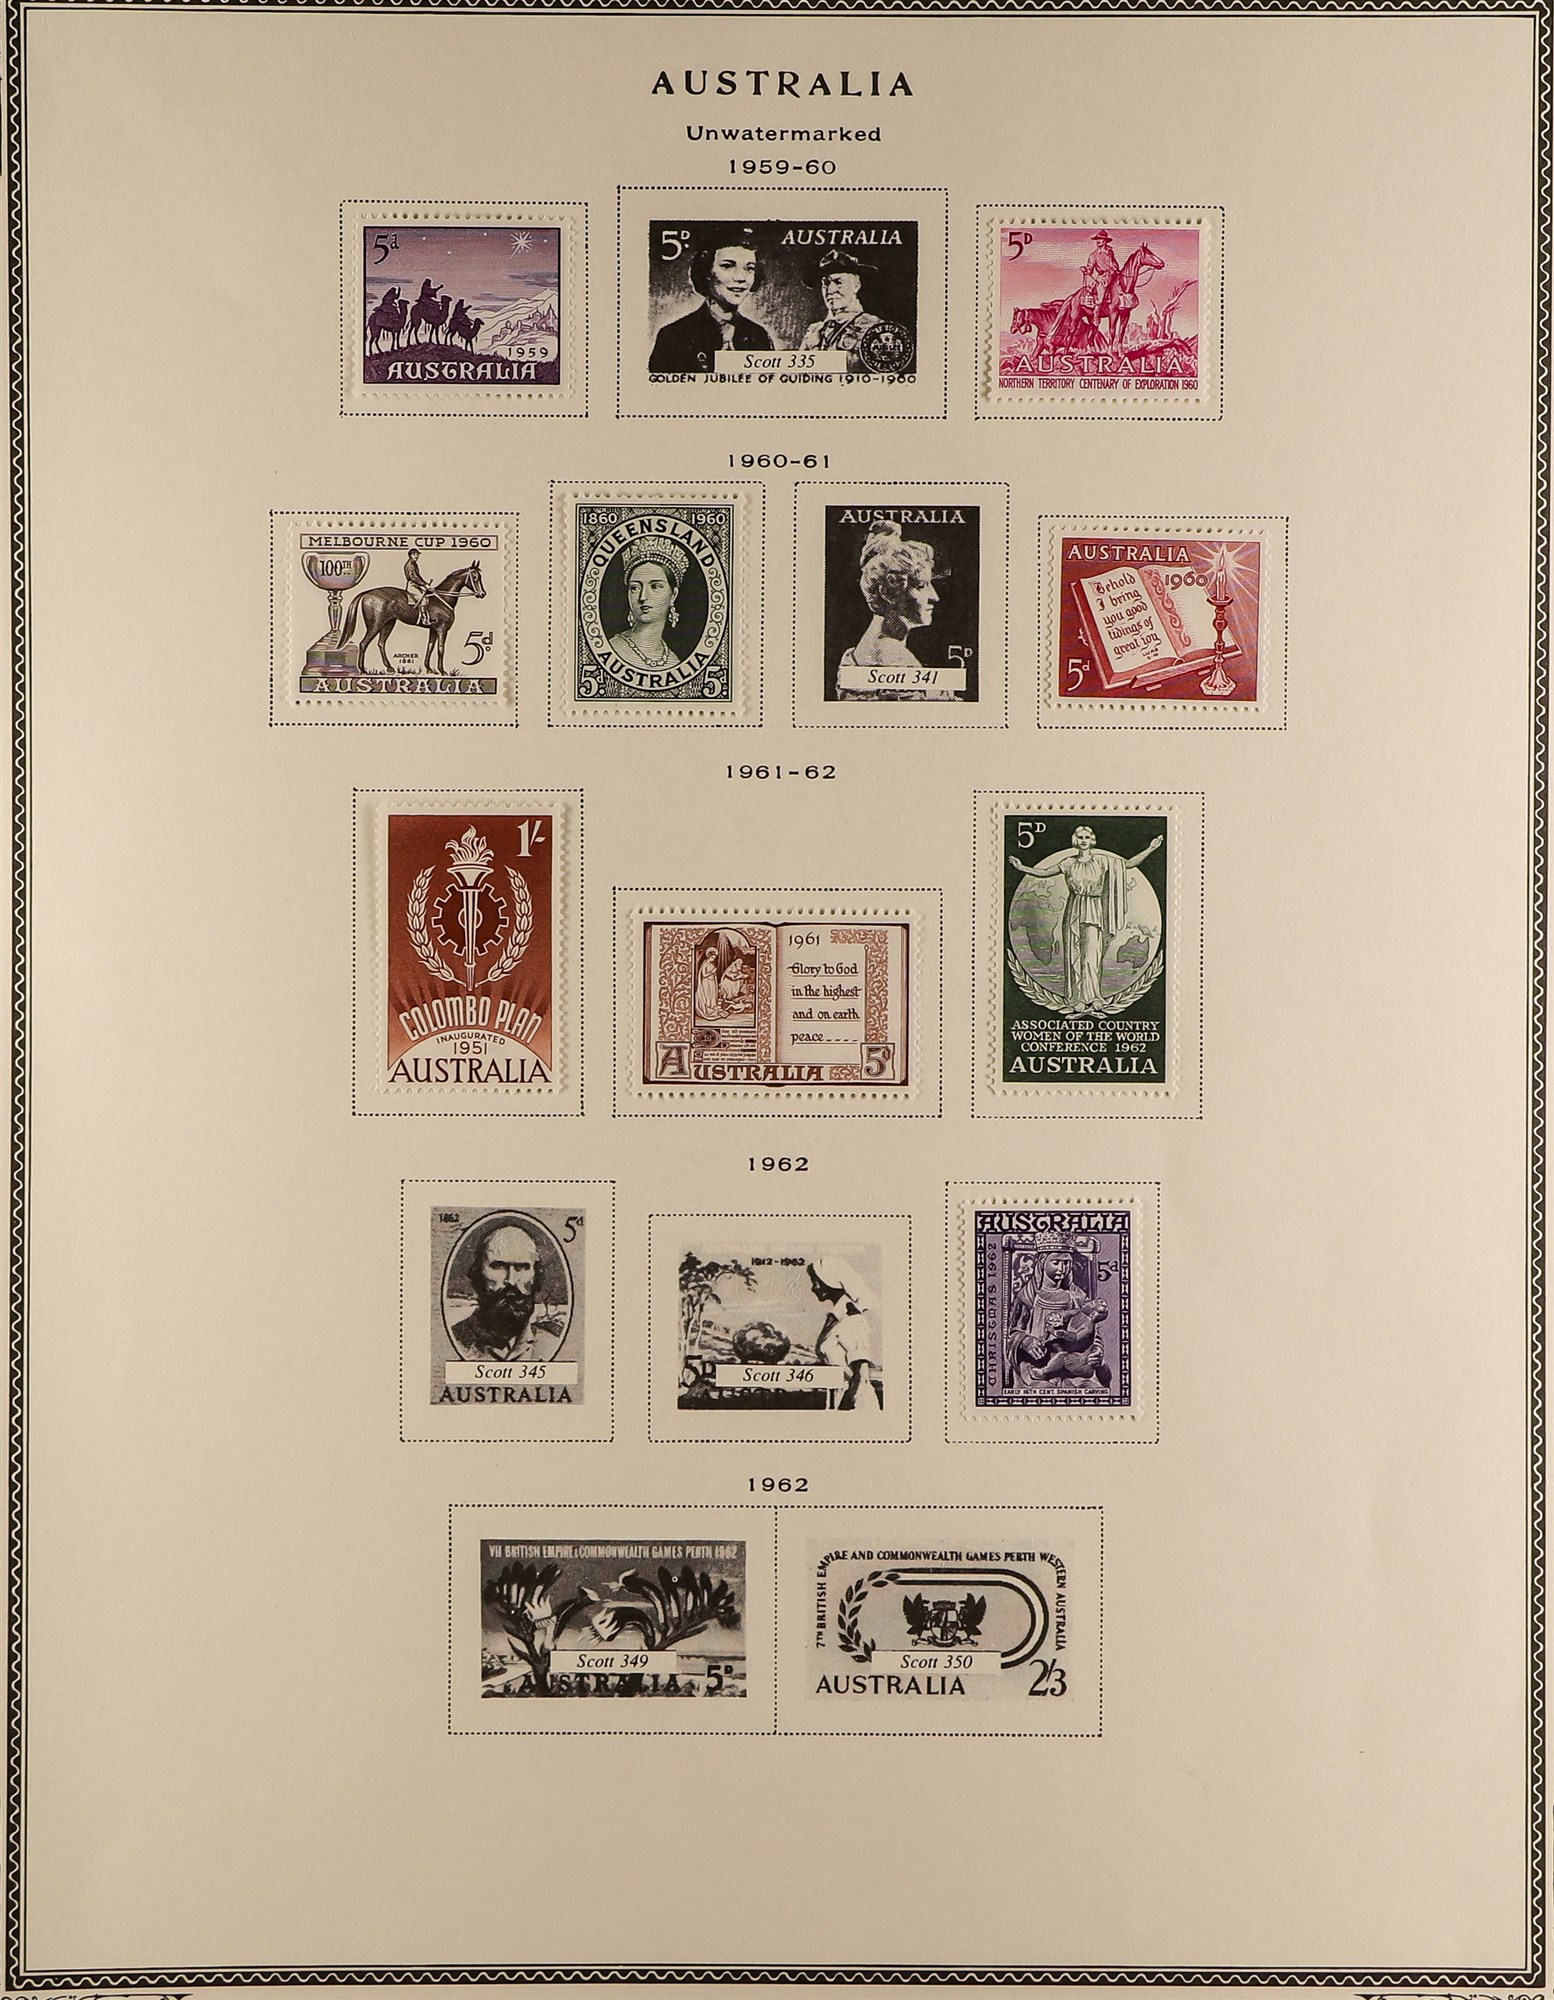 AUSTRALIA 1959 - 1971 MINT COLLECTION on several album pages includes the 1963-65 Navigators set, - Image 2 of 5